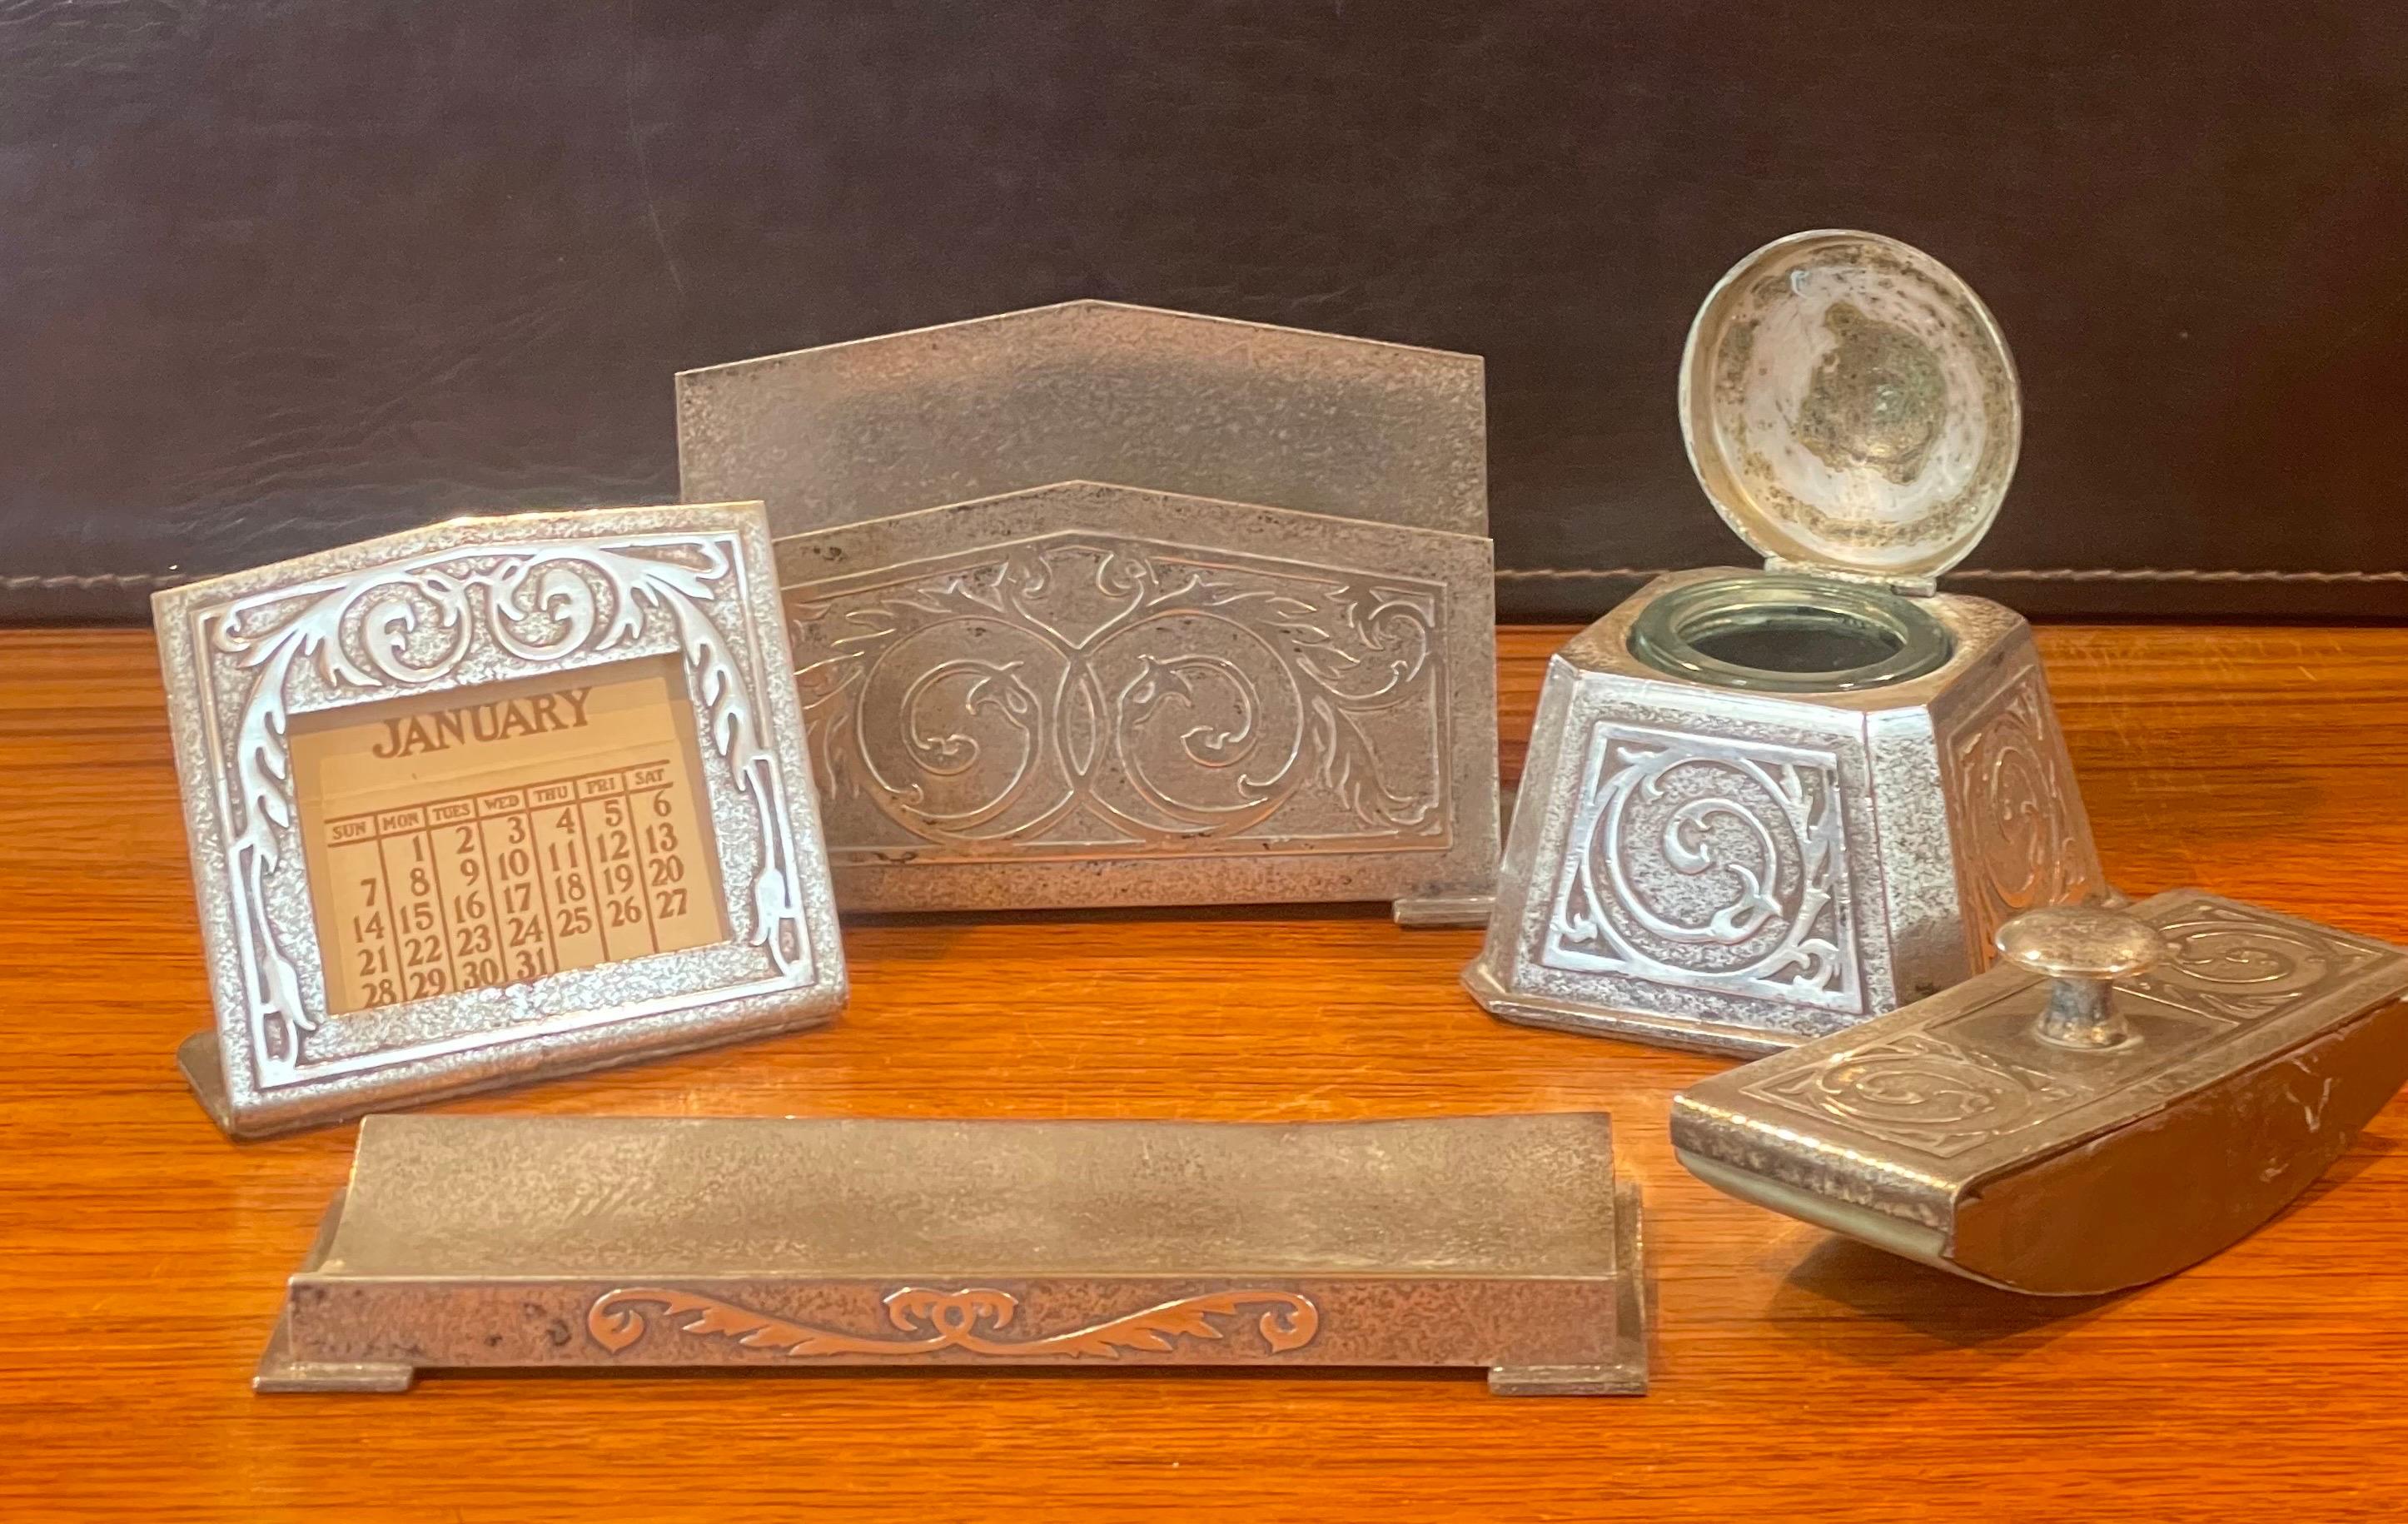 A very nice five piece Art Deco desk set in sterling silver coated bronze by Silver Crest Bronze Co., circa 1930s. The set is in good vintage condition with a wonderful patina and includes: ink weel, blotter, adjustable calendar, letter holder and